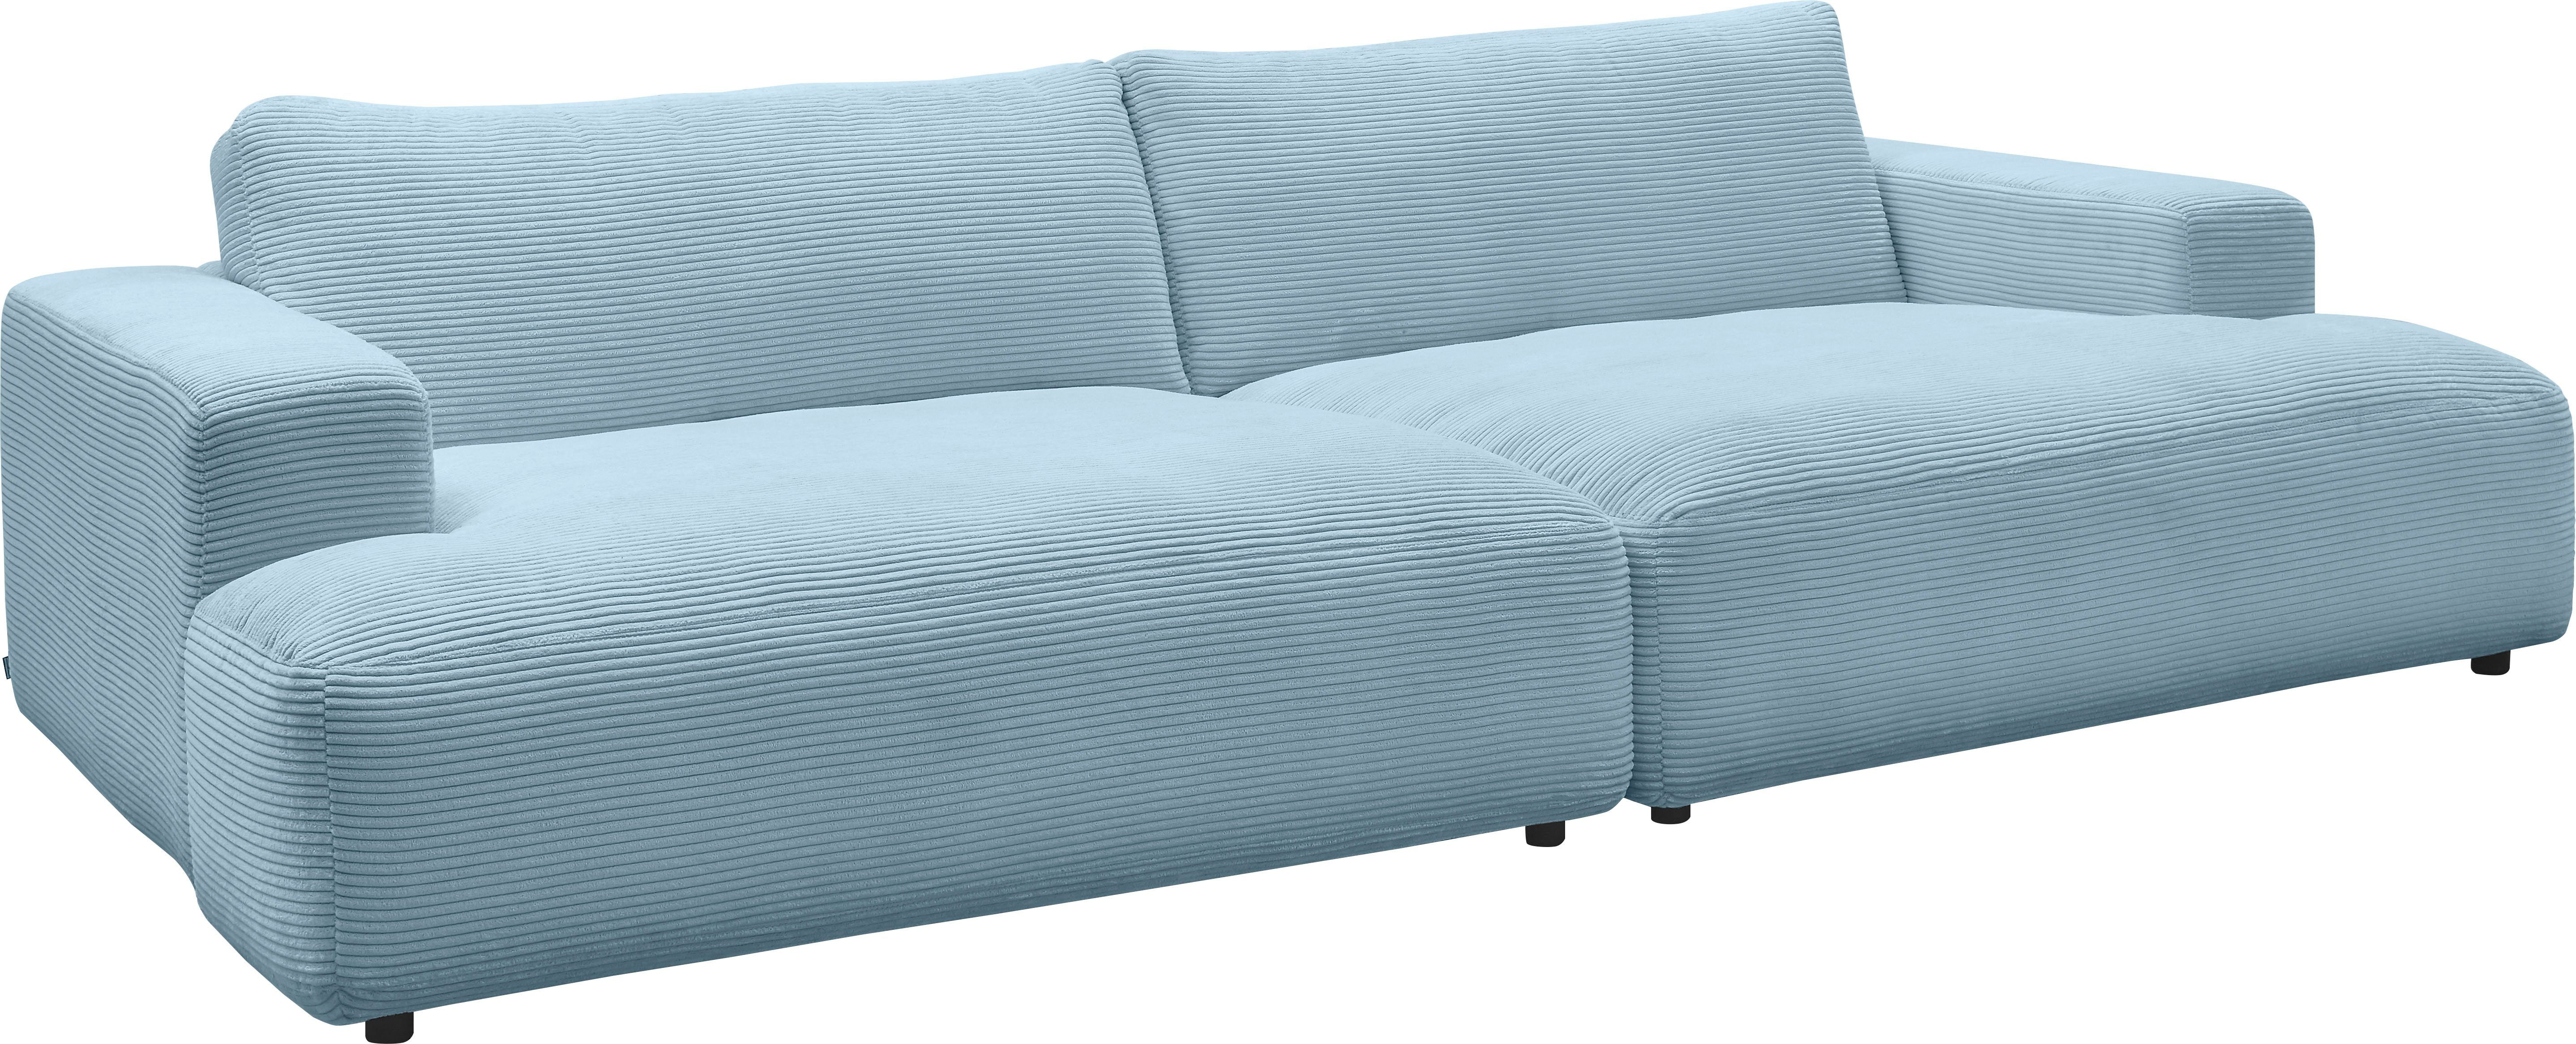 292 GALLERY by branded light-blue Lucia, Cord-Bezug, Breite Musterring Loungesofa cm M